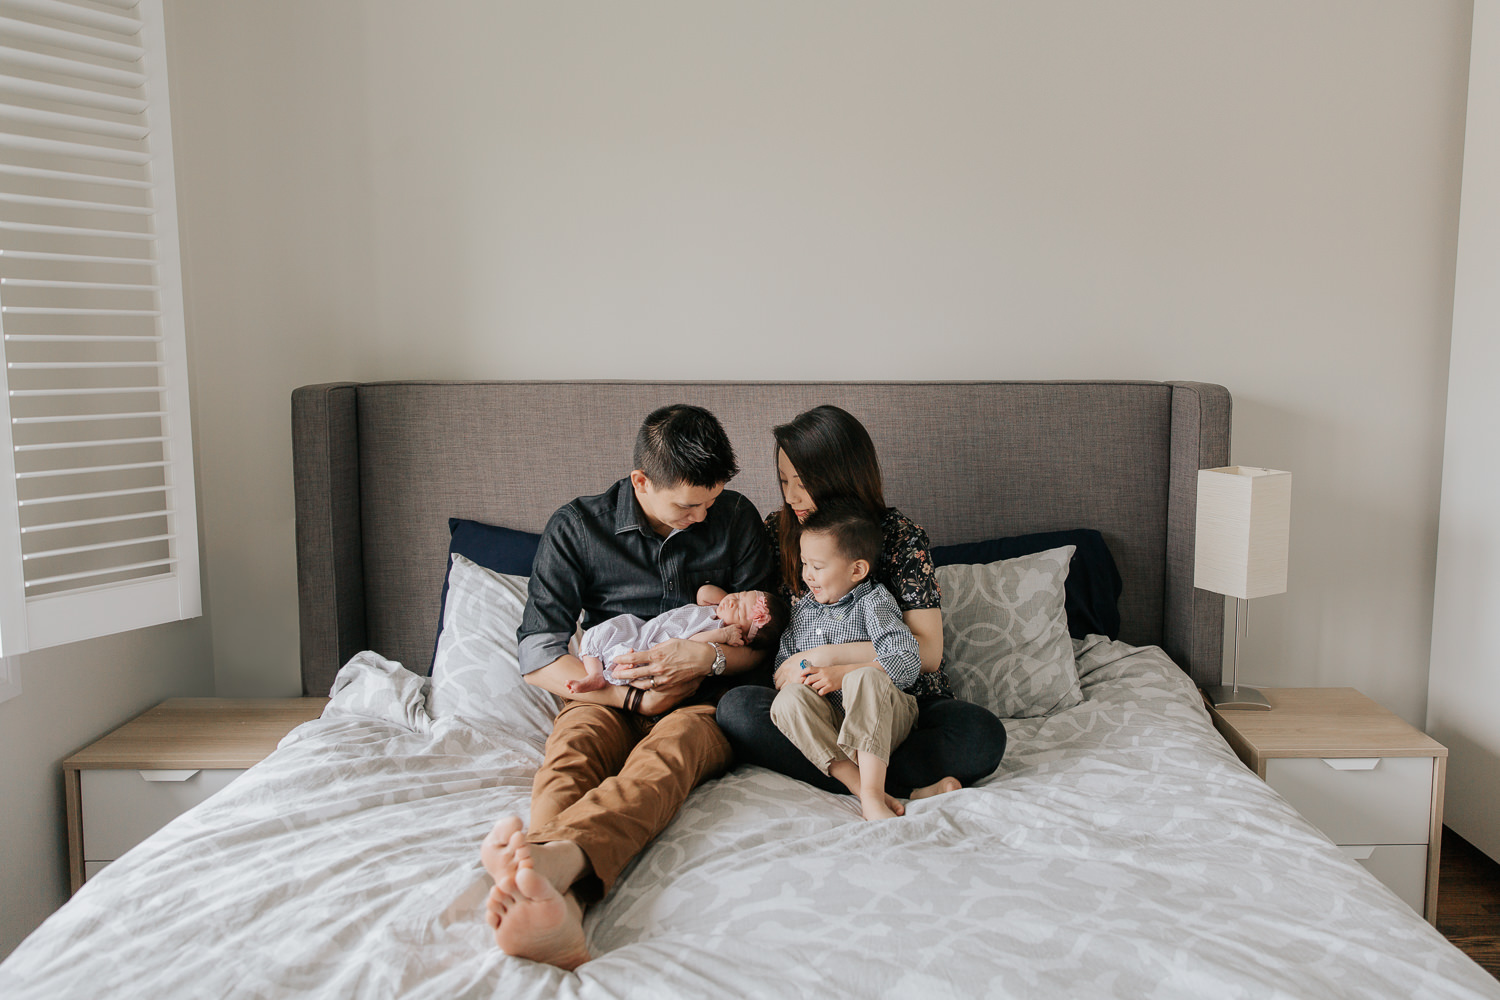 family of 4 sitting on master bed, dad holding 2 week old baby girl and mom with 3 year old toddler boy in her lap, everyone looking at new baby - Stouffville Lifestyle Photos